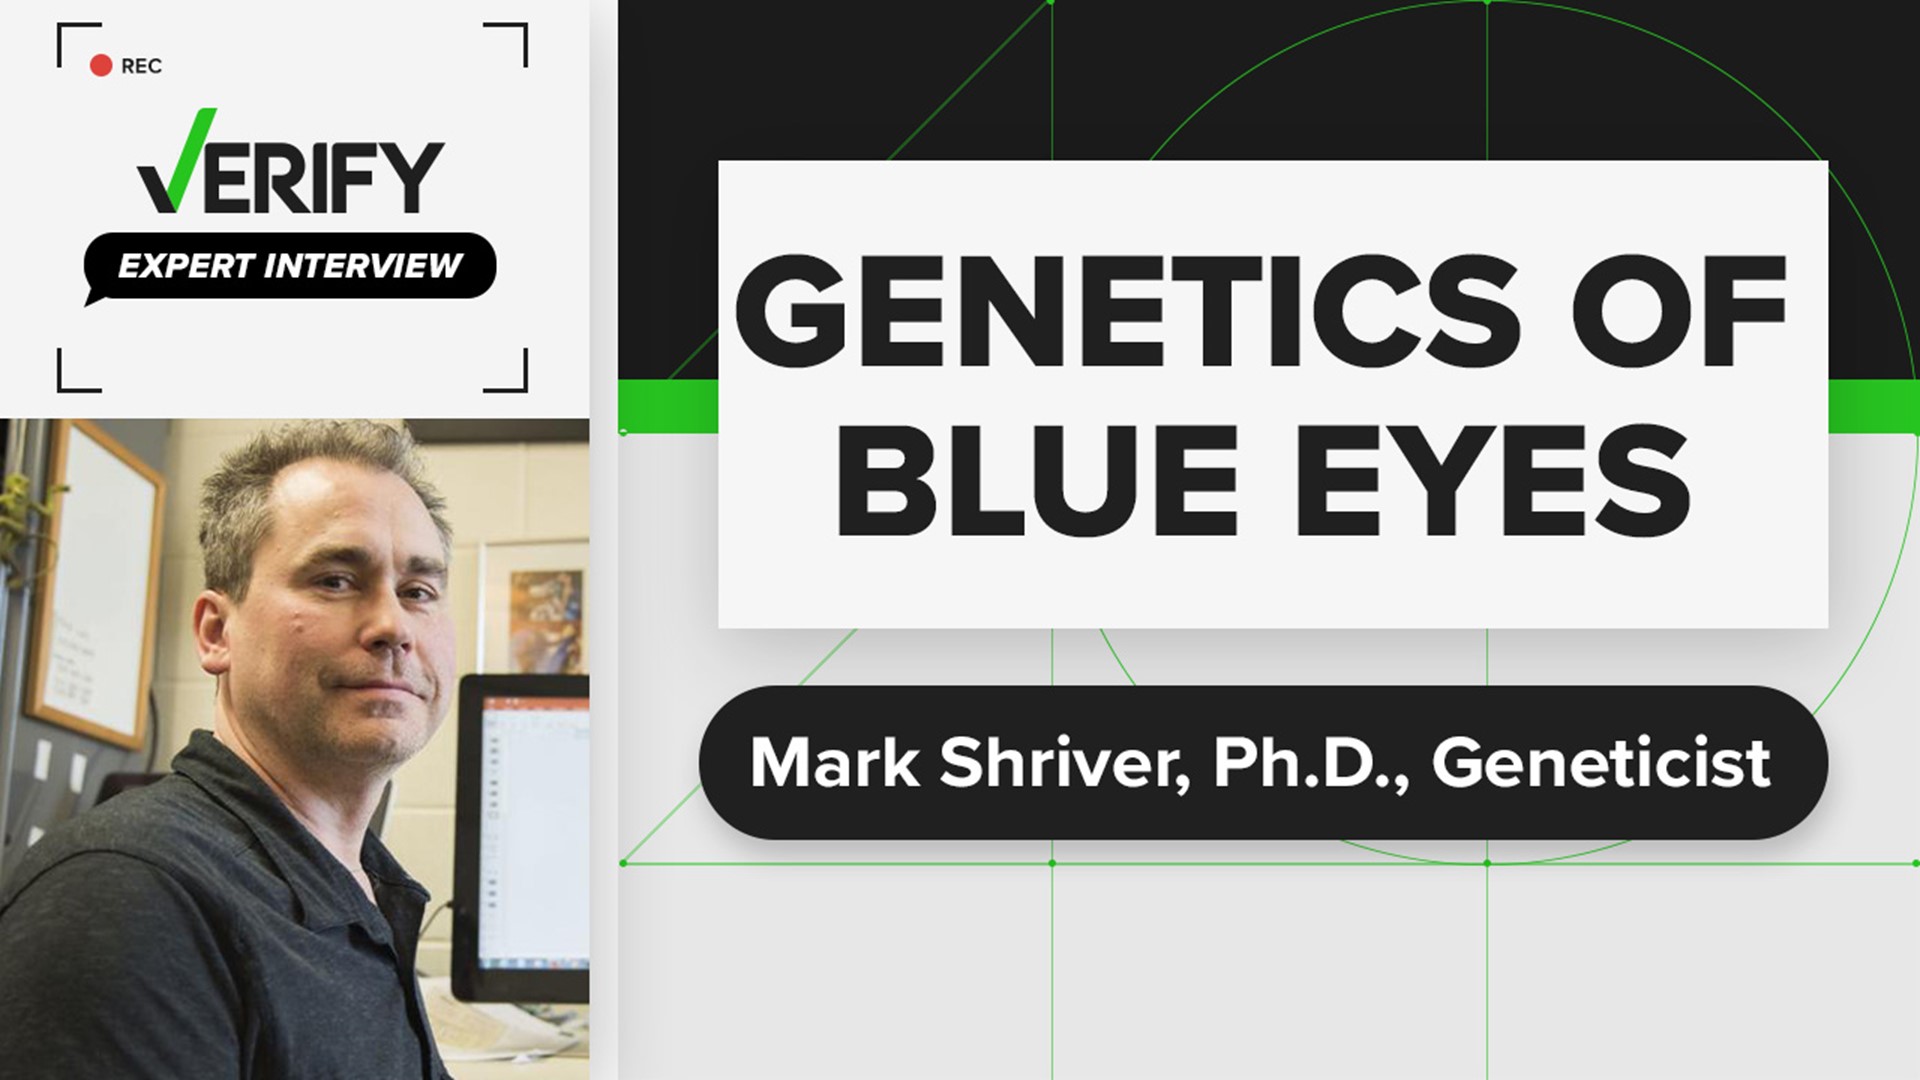 Anthropologist and geneticist Mark Shriver, Ph.D. talks with VERIFY about the genetics of people with blue eyes and explains how they are genetically related.